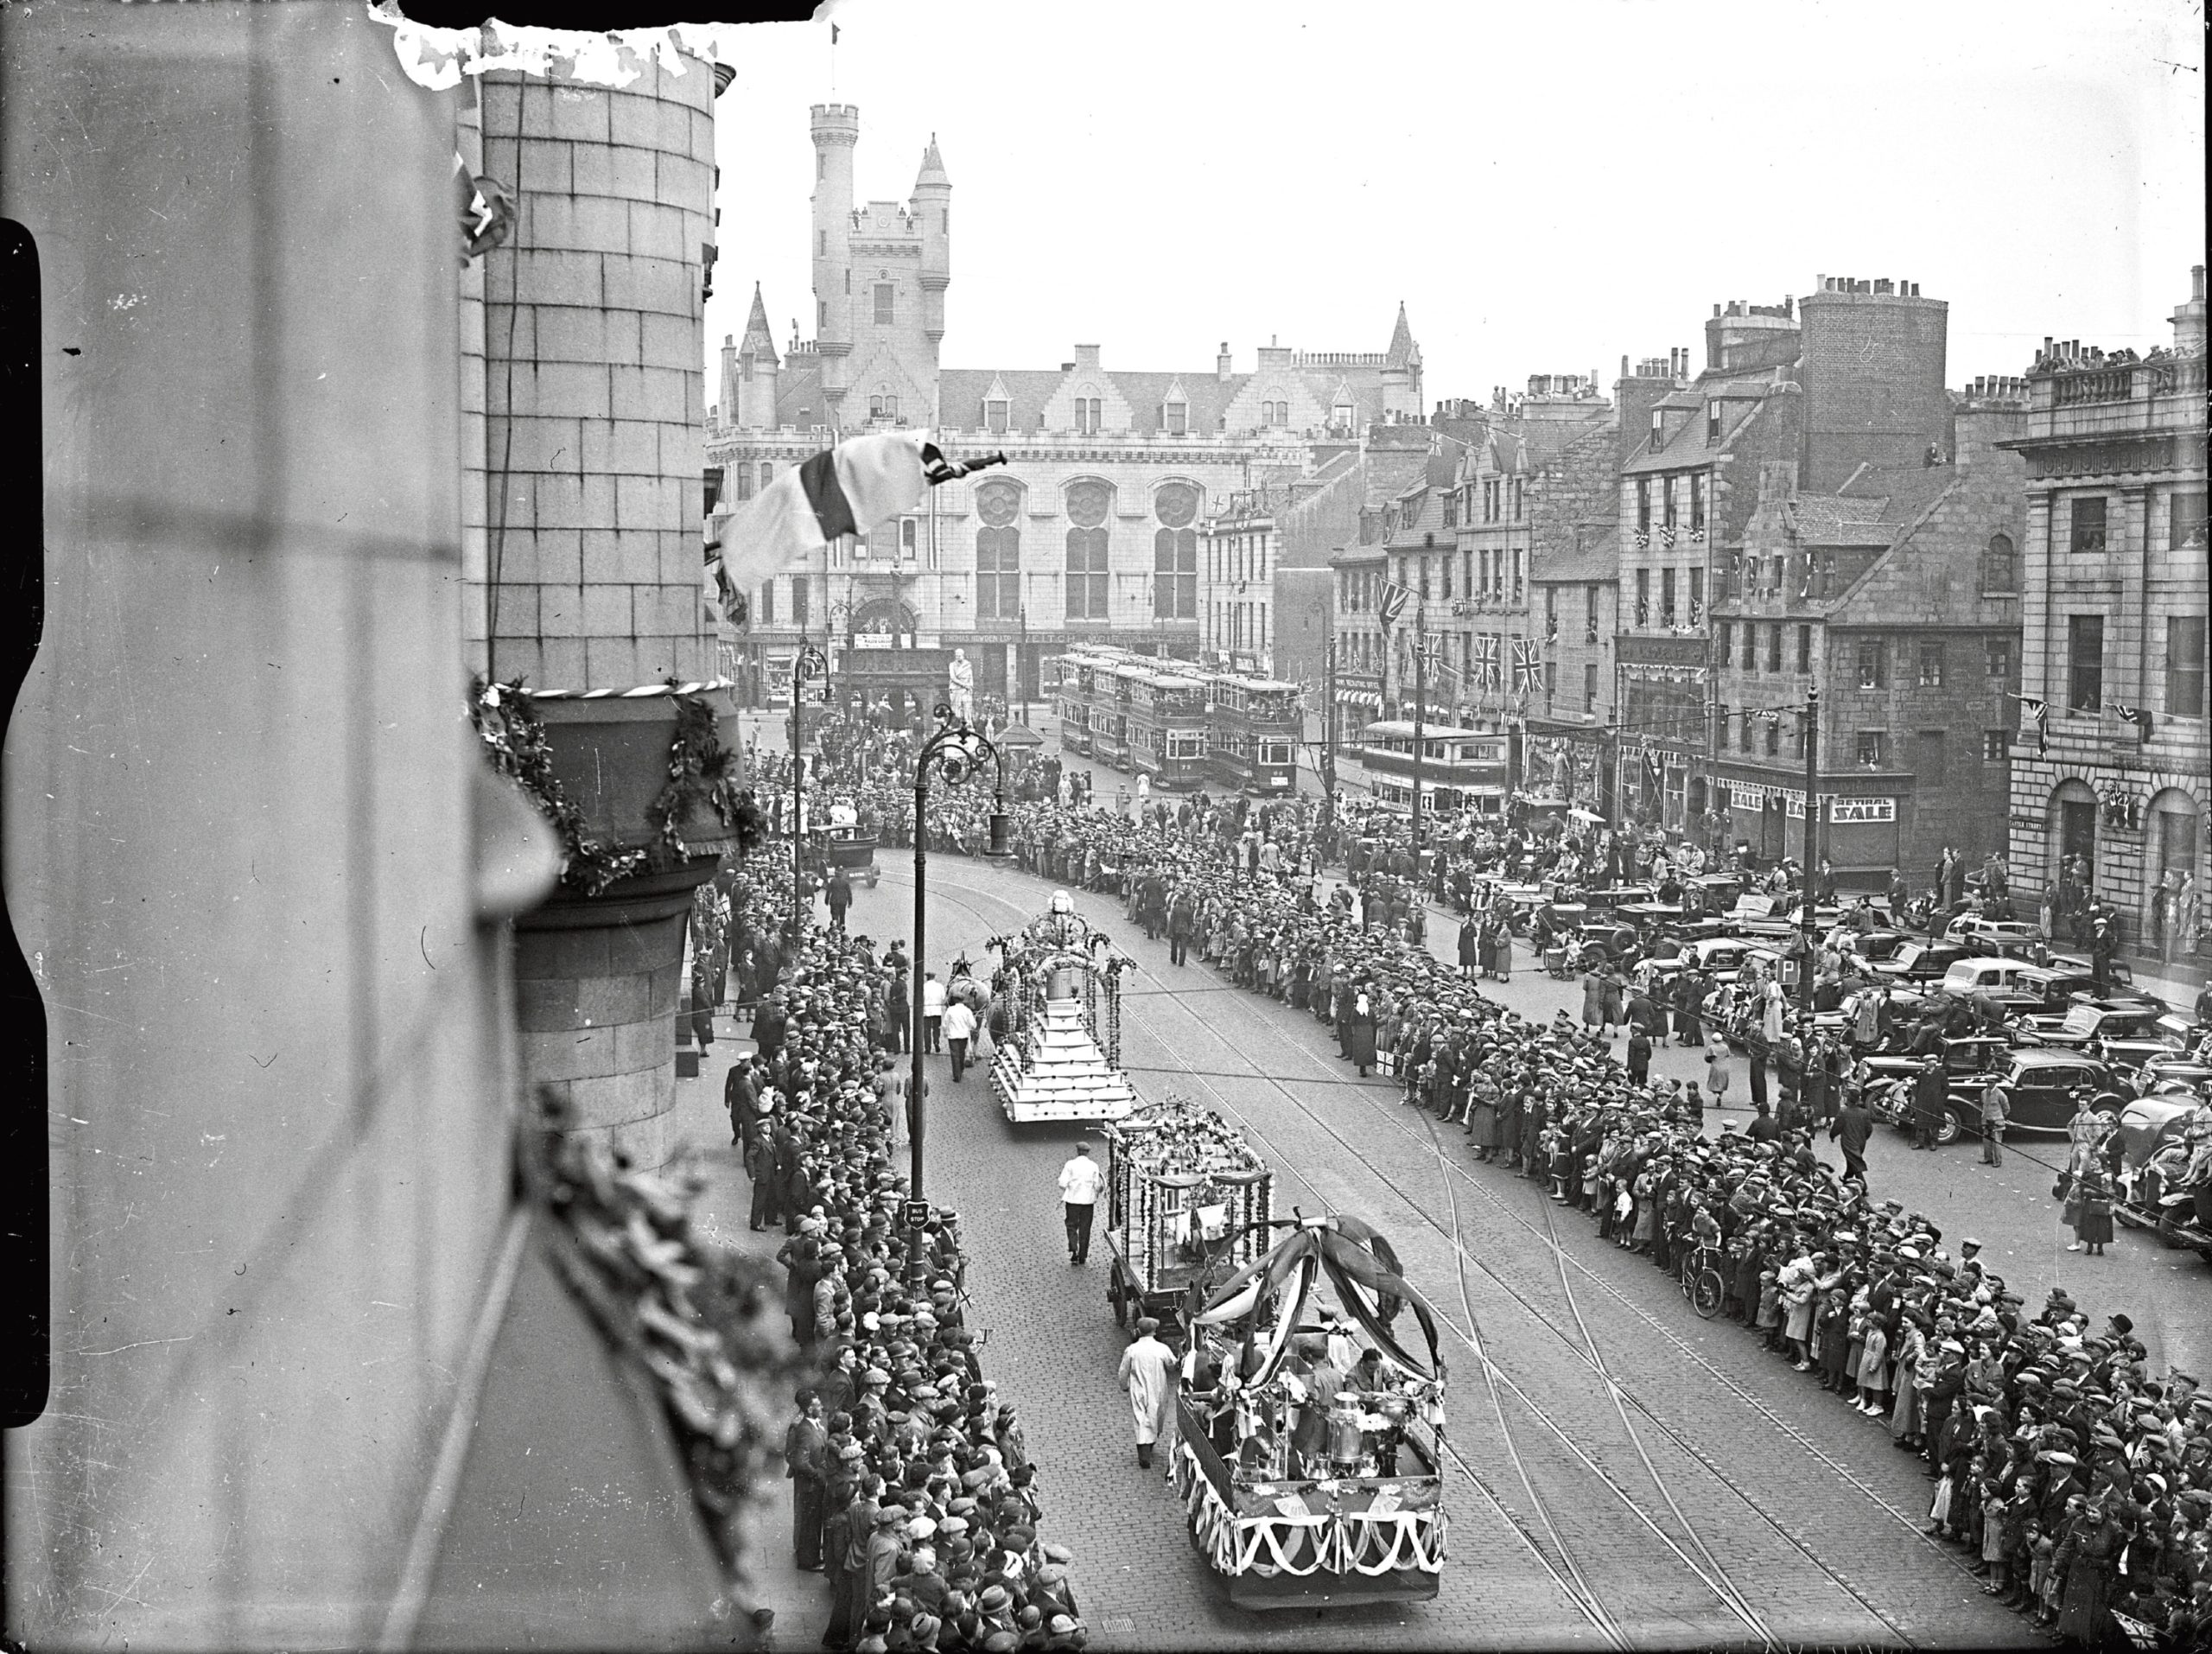 Aberdeen's lamented trams are all lined up at the Castlegate terminus during the King George VI Coronation celebrations in 1937.